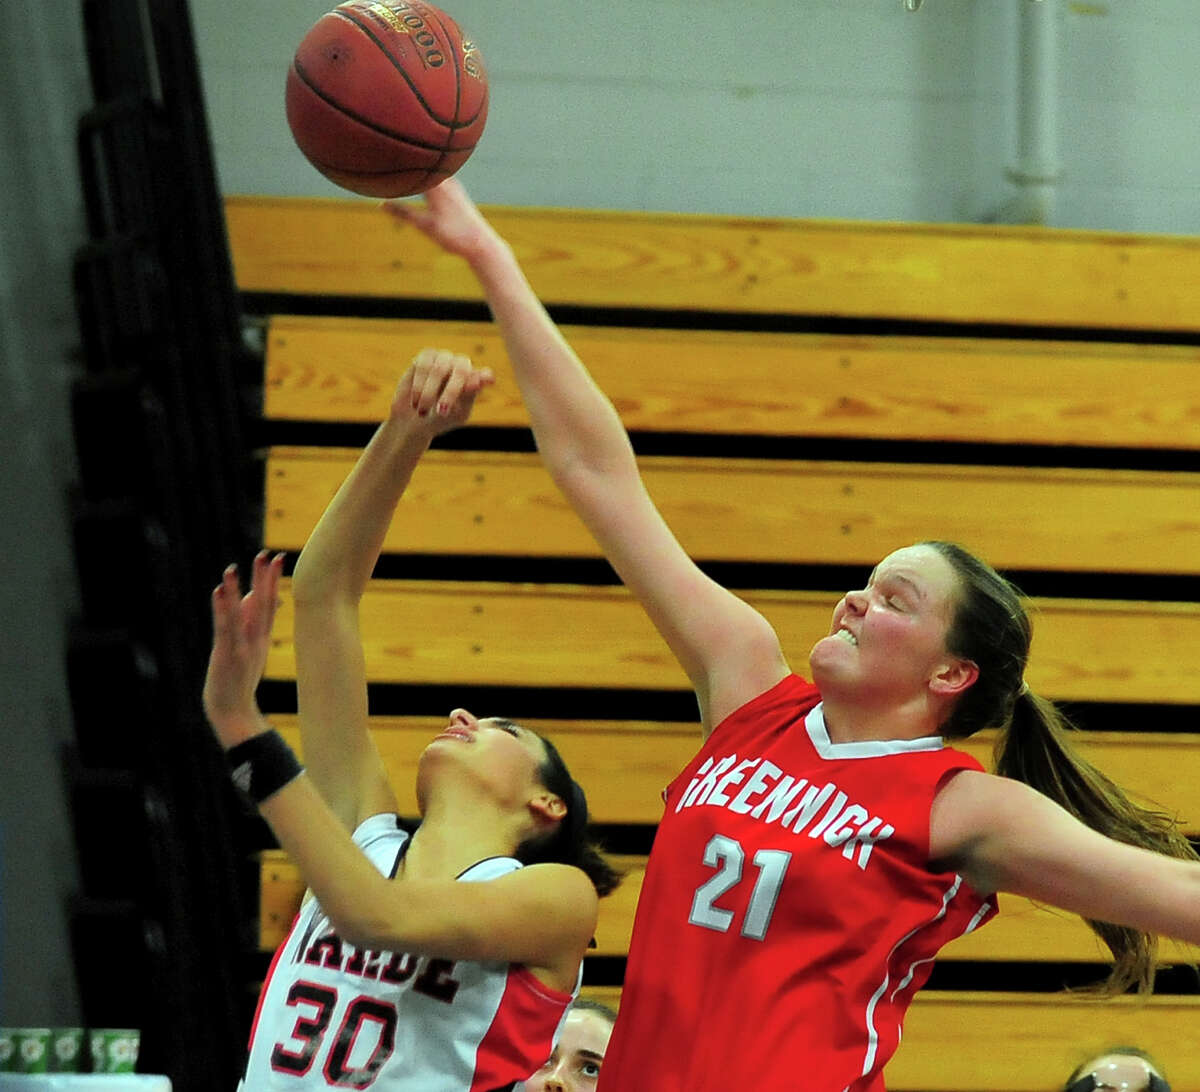 reenwich's Abigail Wolf, right, blocks a shot by Fairfield Warde's Sarah Cotto, during FCIAC Girls' Basketball Semi-finals action in Fairfield, Conn. on Tuesday Feb. 24, 2015.